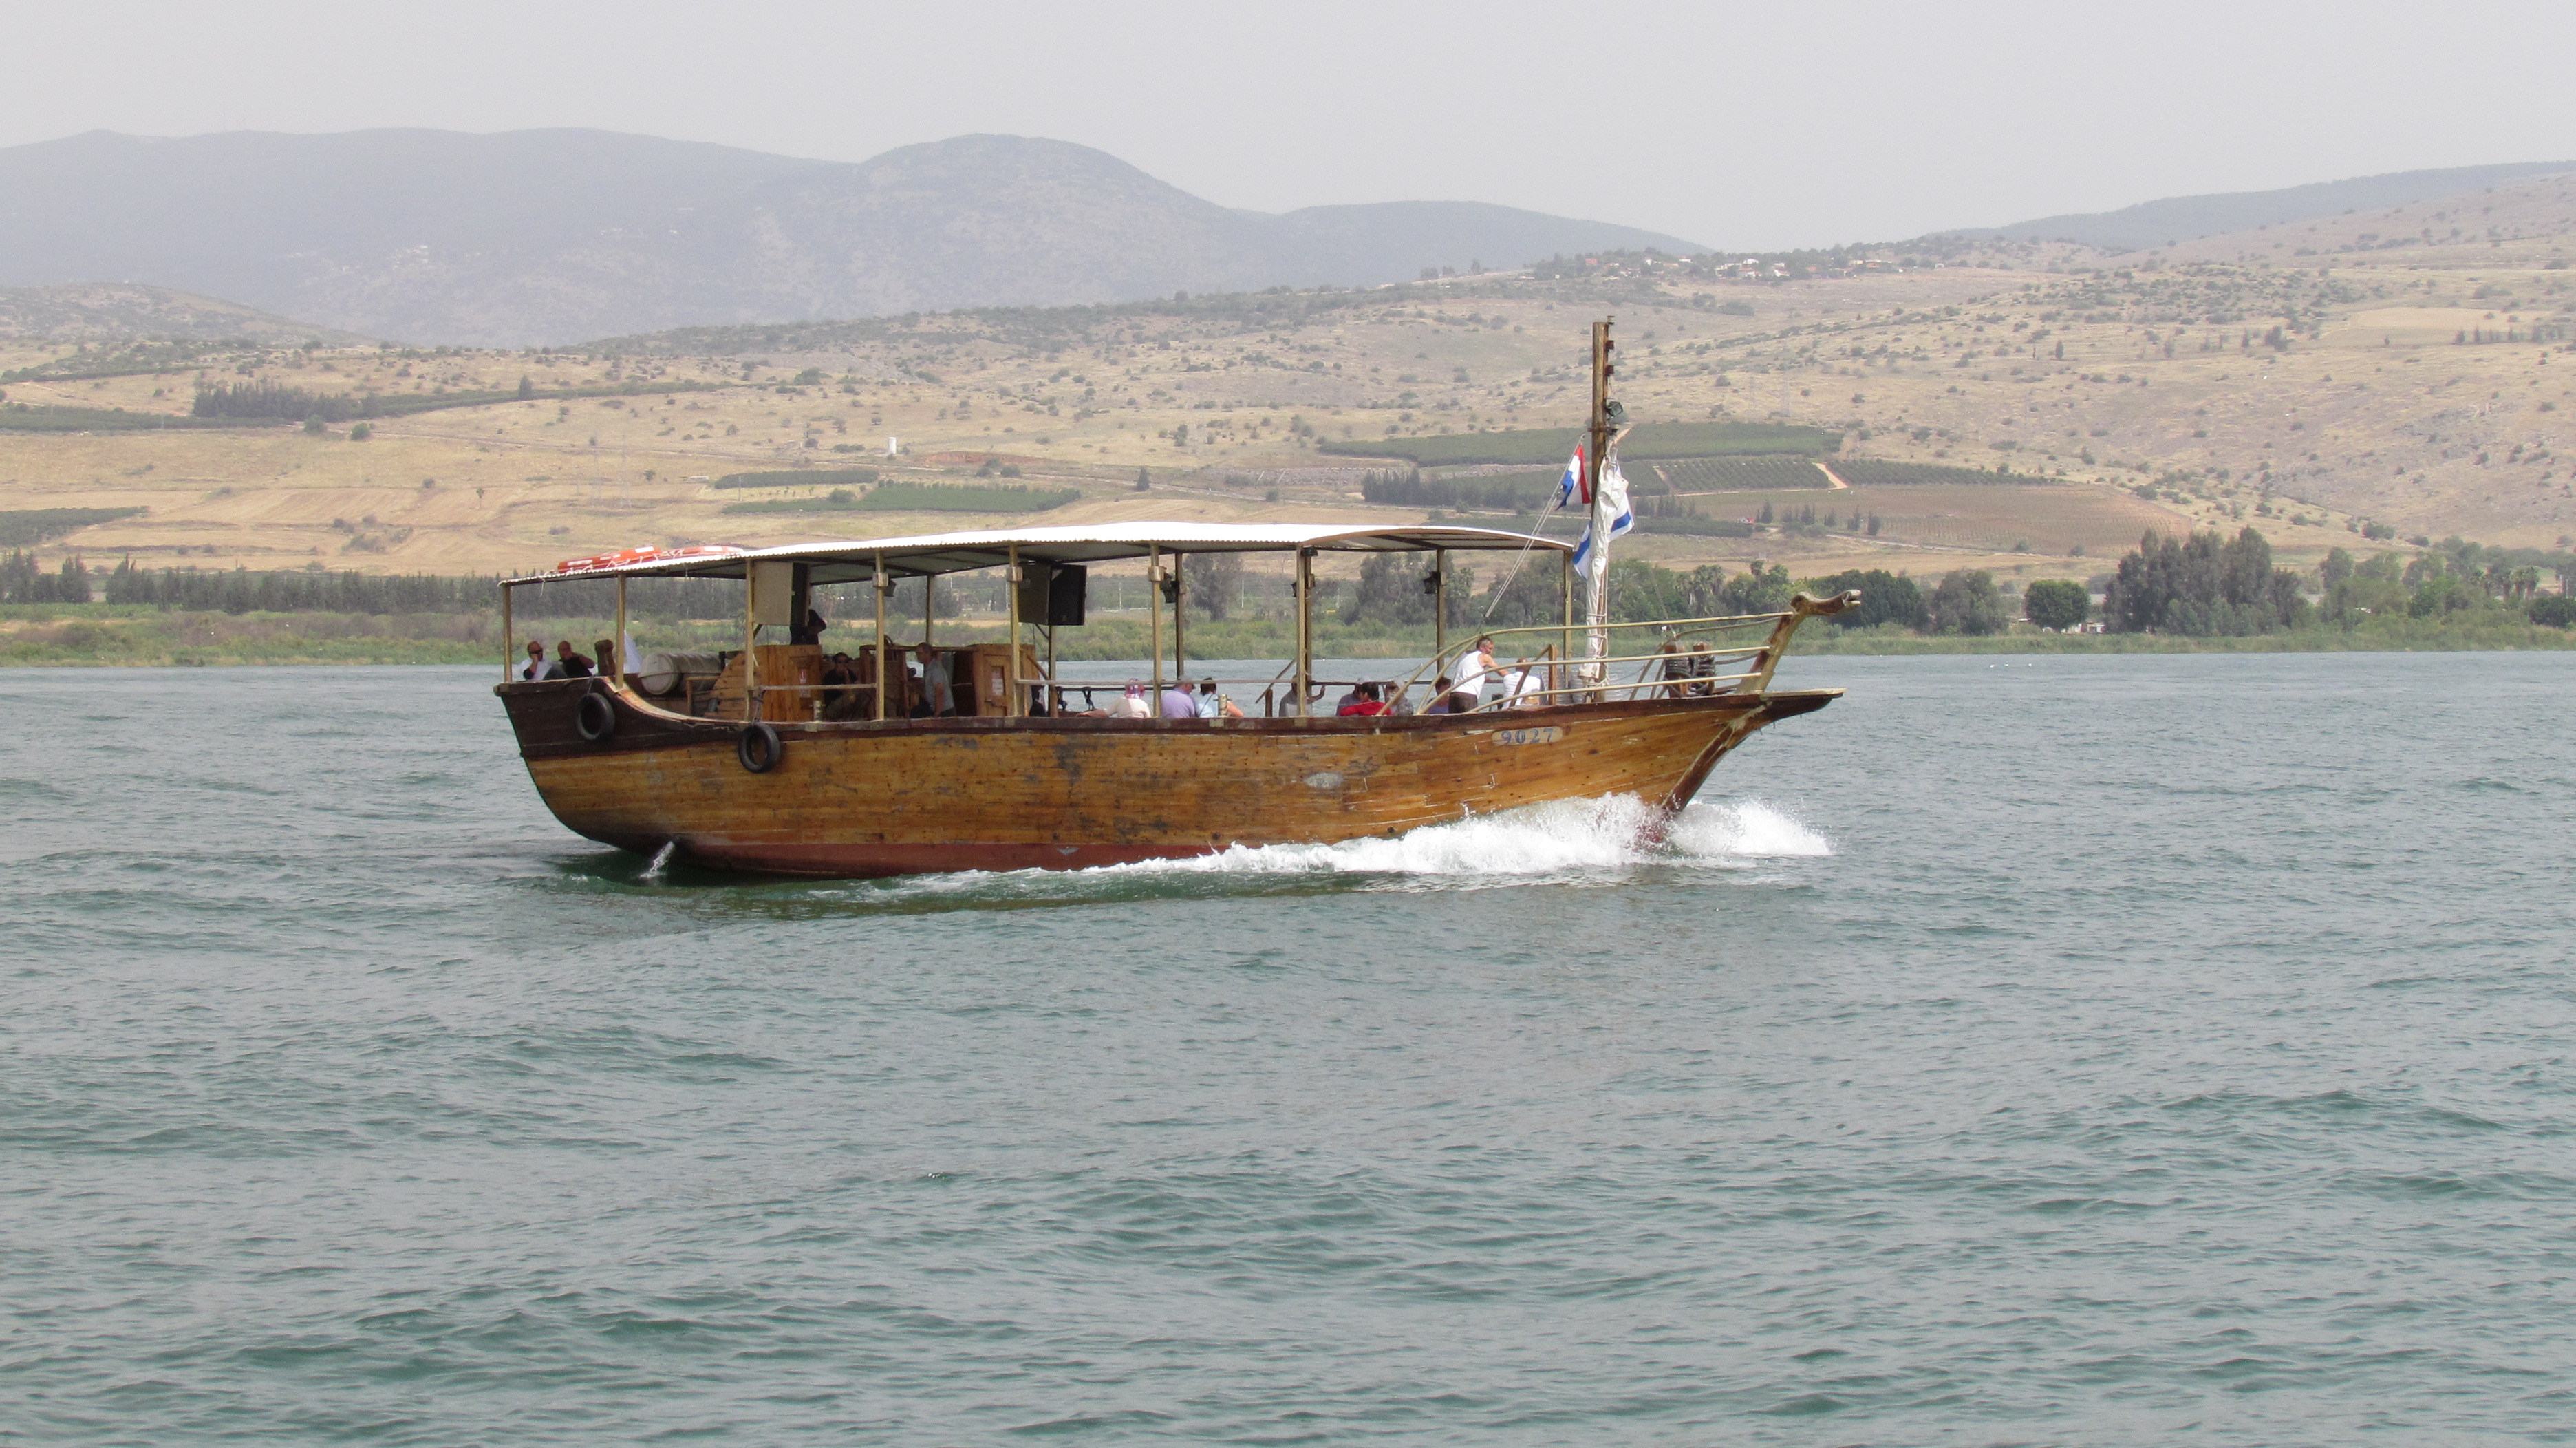 Sea of Galilee boat ride | Holy Land Tour